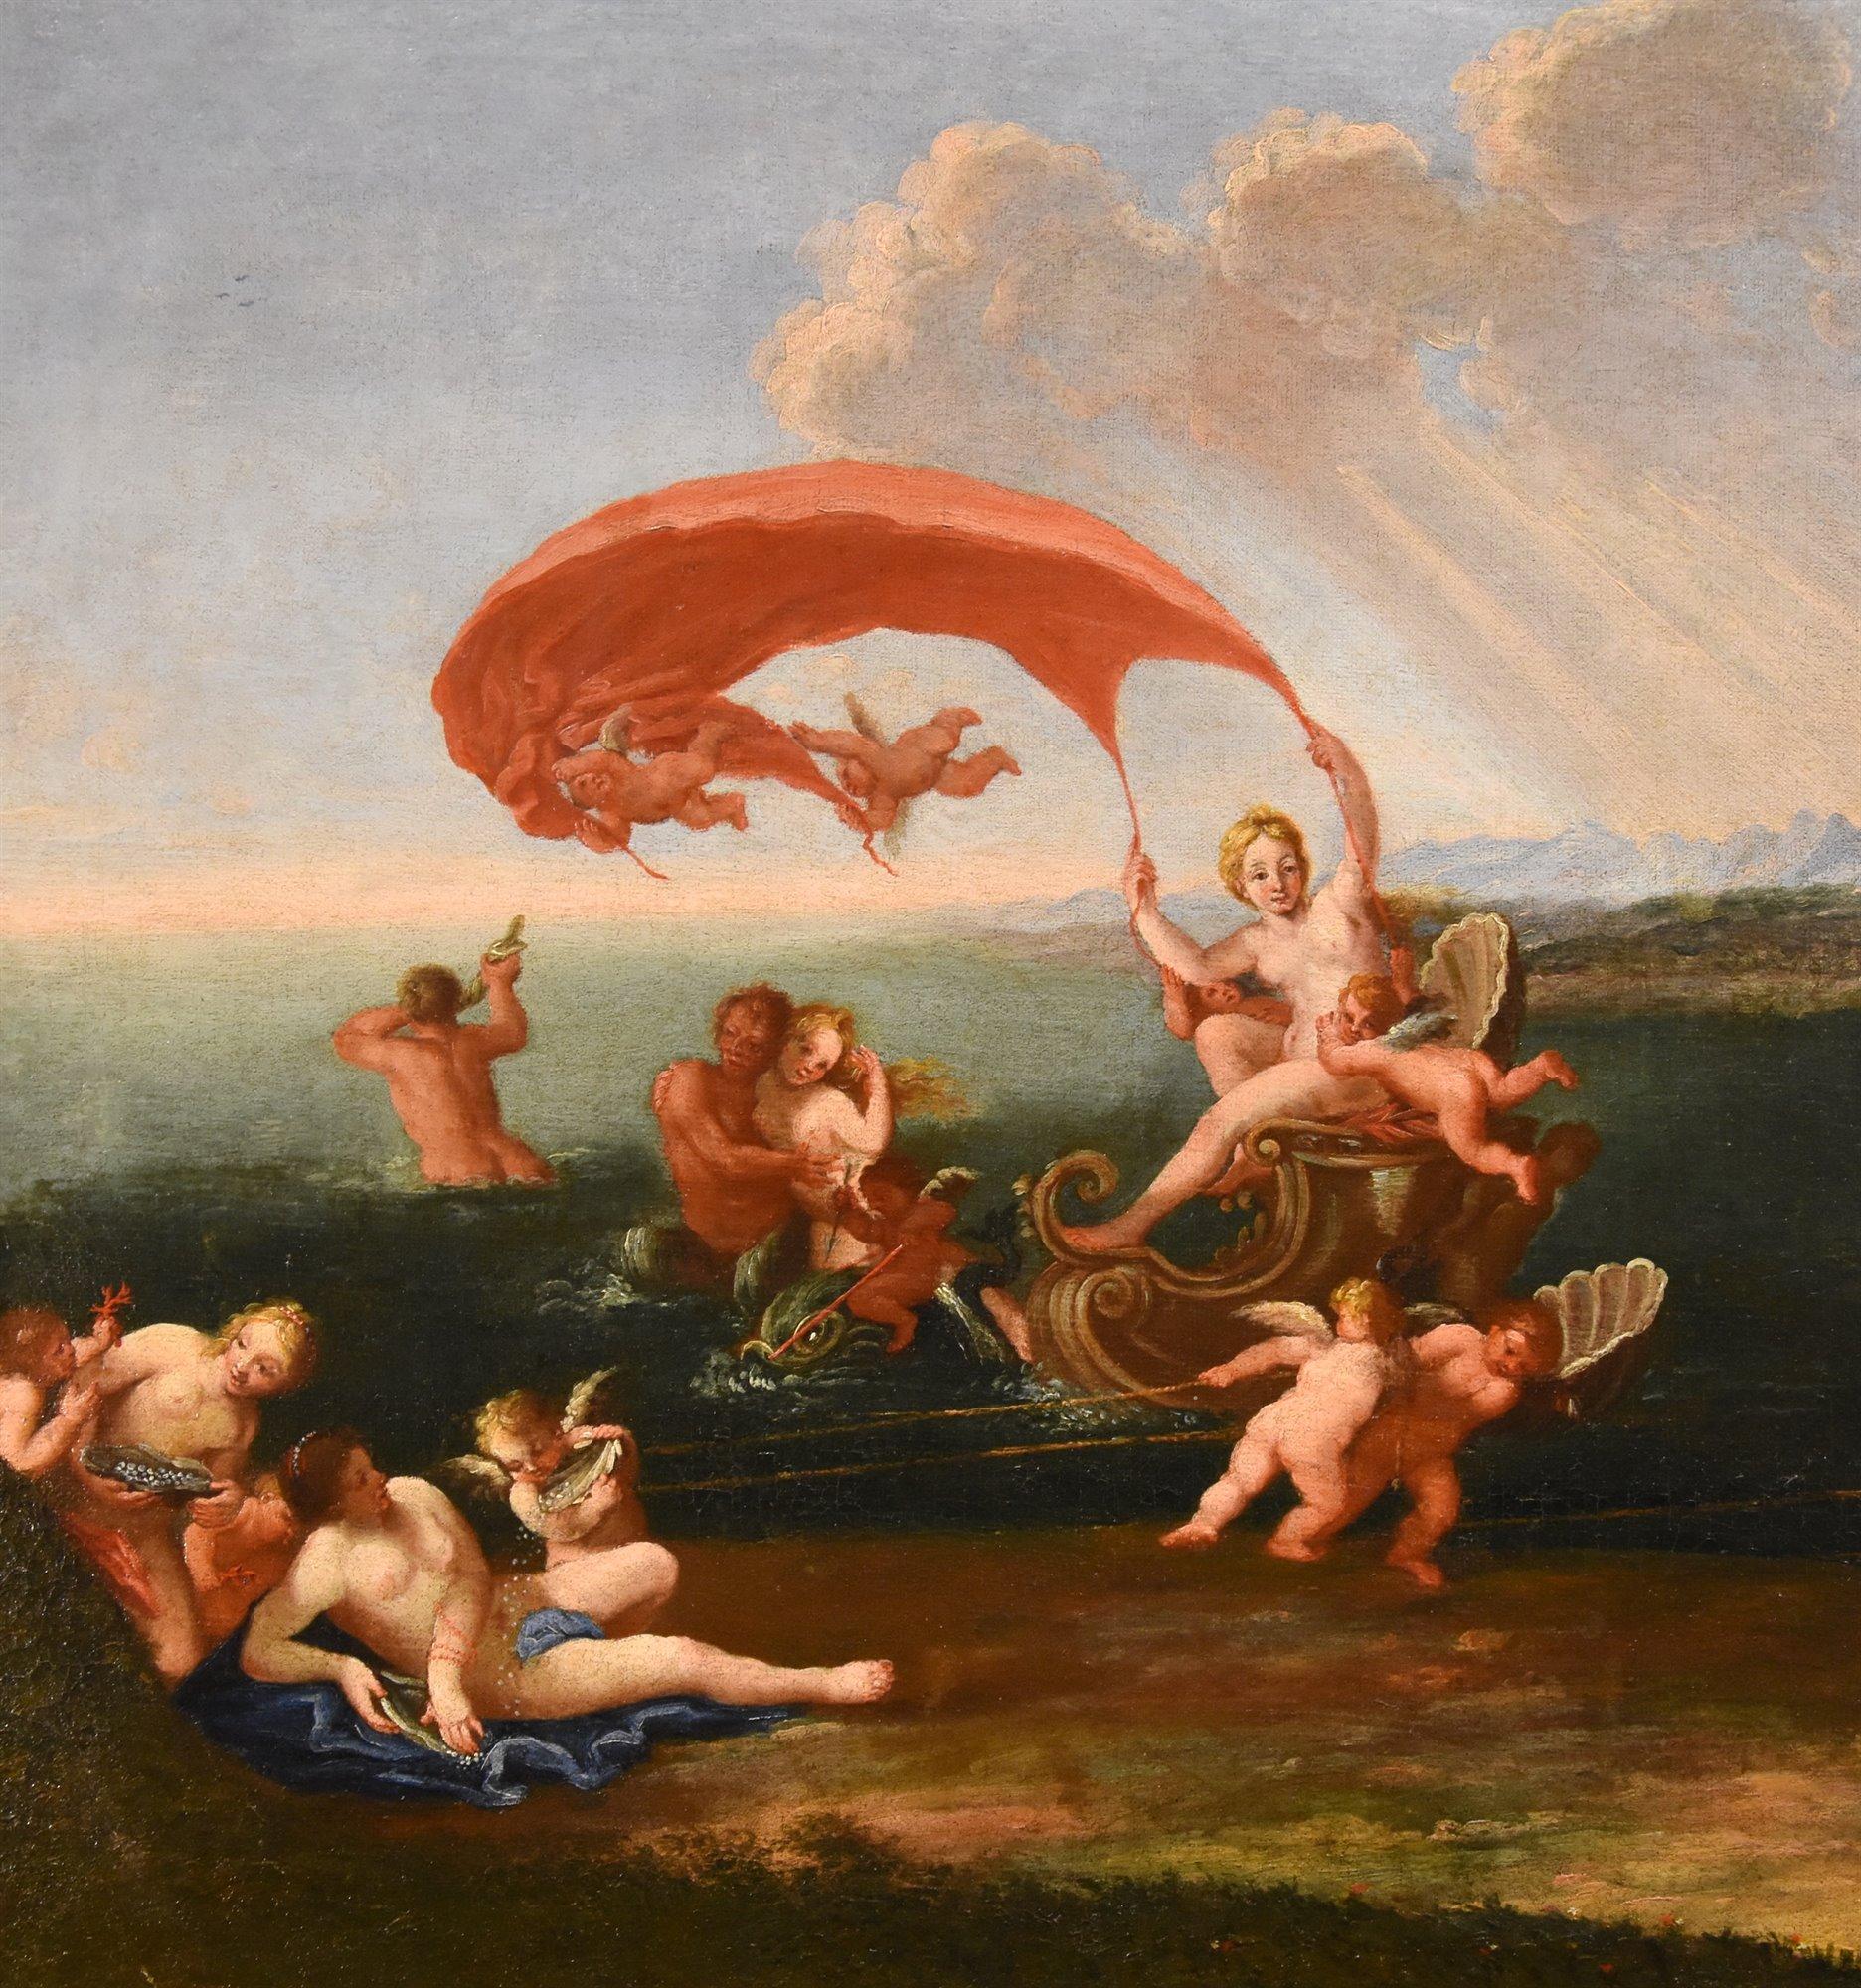 Francesco Albani (Bologna 1578 - 1660) Circle of
The Triumph of the Galatea Nymph (or Allegory of Water)
from Ovid, Metamorphoses, book XIII

Oil on canvas (53 x 72 cm. - in frame 62 x 82 cm.)

The proposed beautiful painting depicting The Triumph